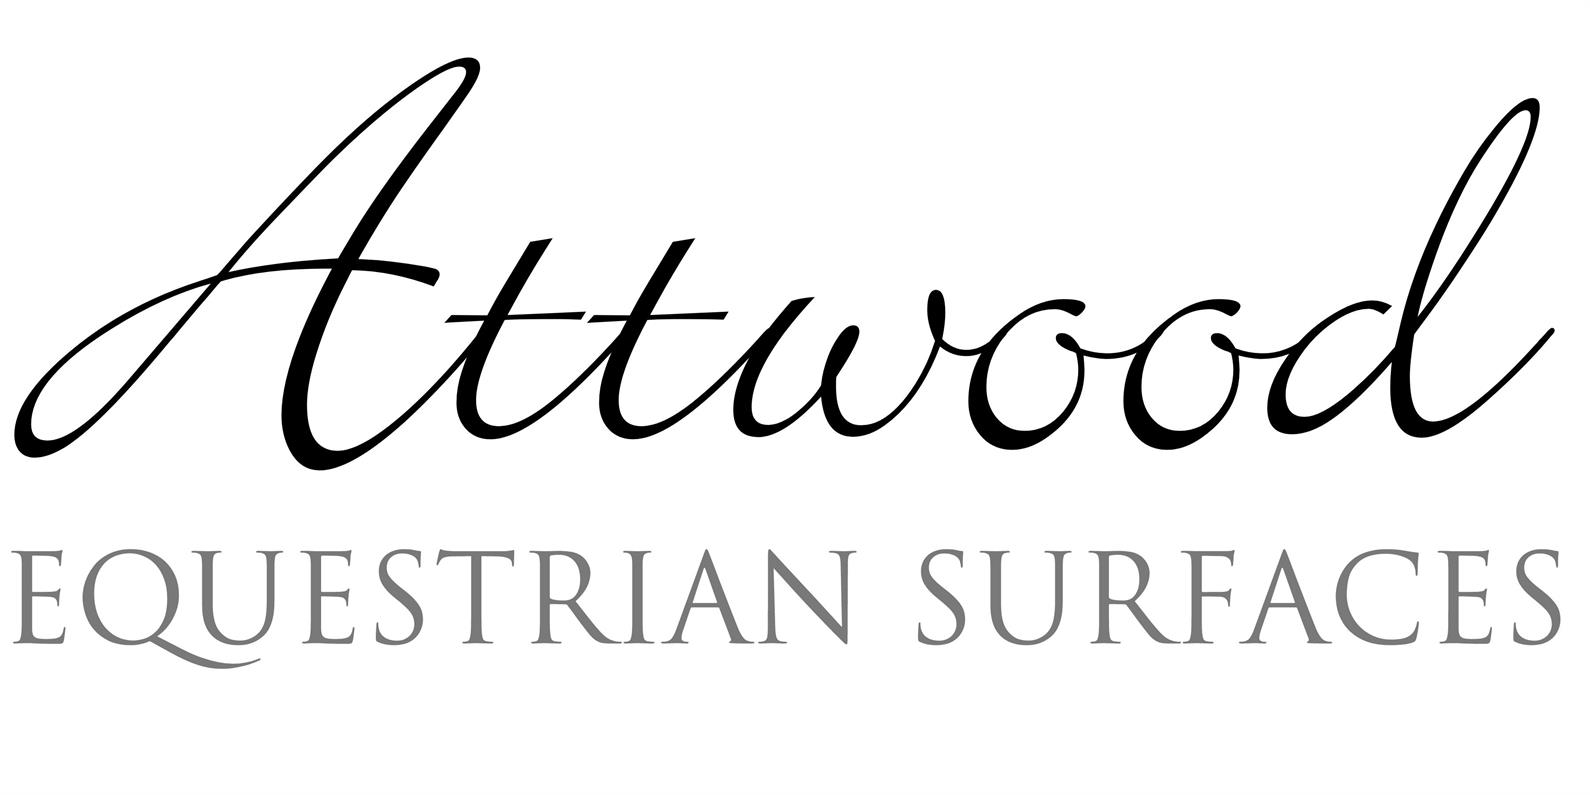 Attwood (Competition Managers Perk)